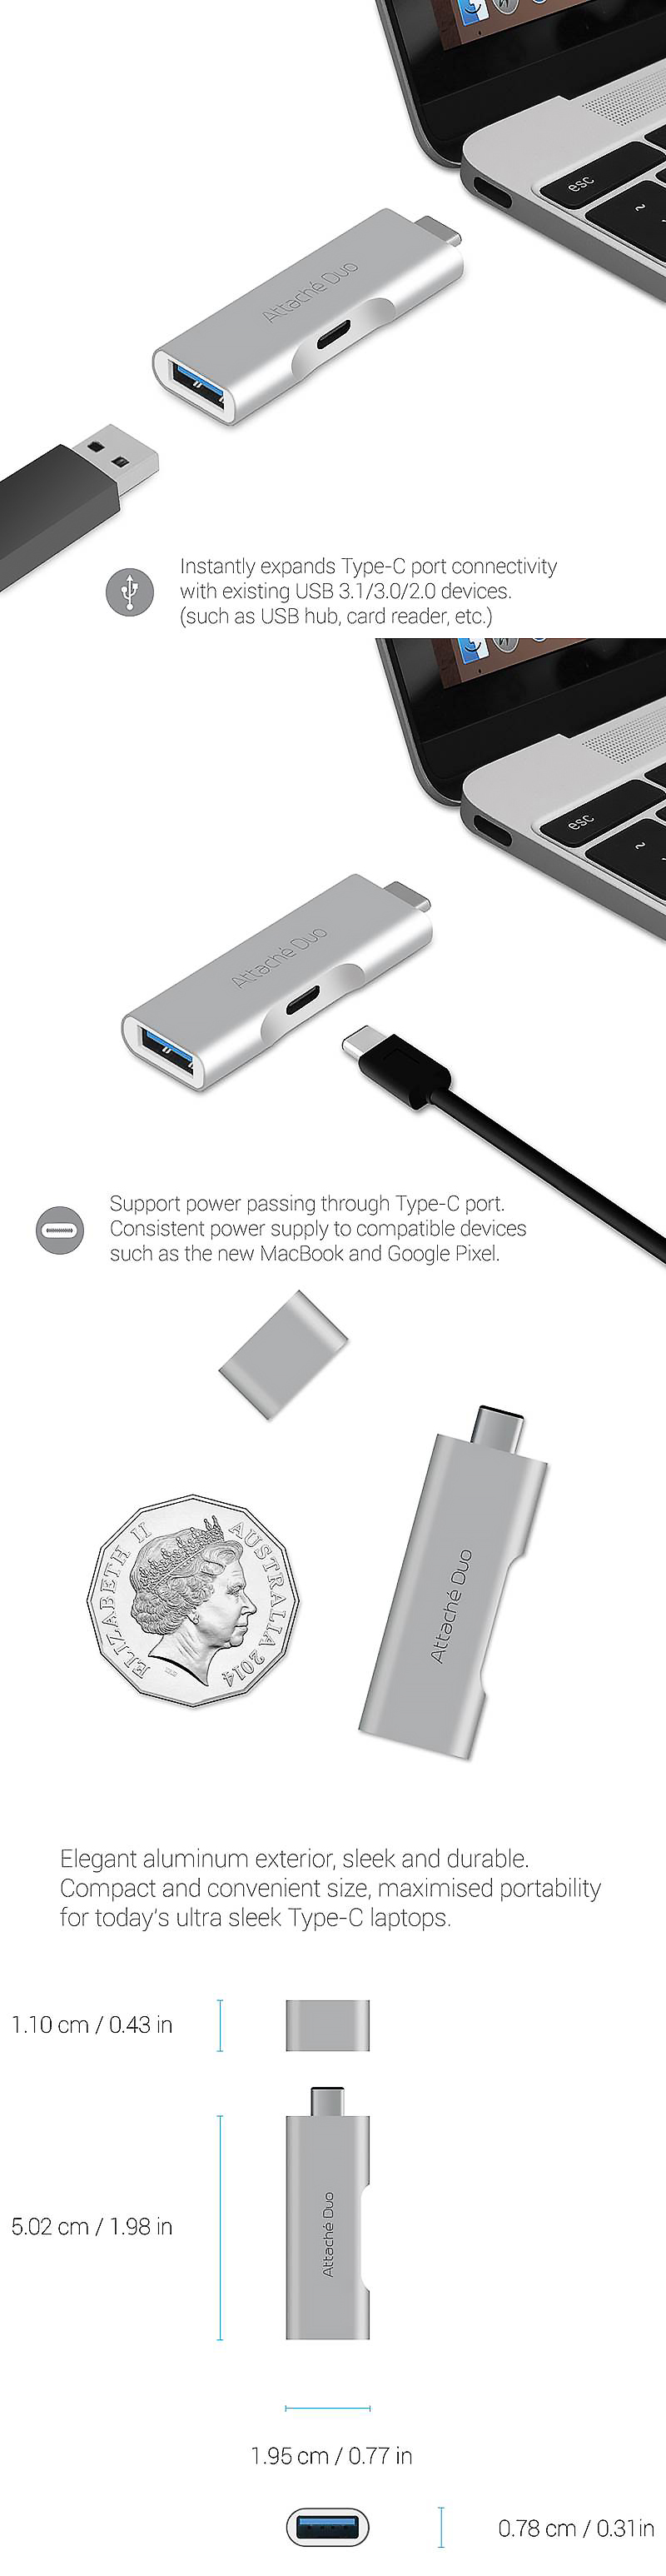 USB-Cables-mbeat-Attach-Duo-USB-C-To-USB-3-1-Adapter-With-Type-C-Charging-Port-4